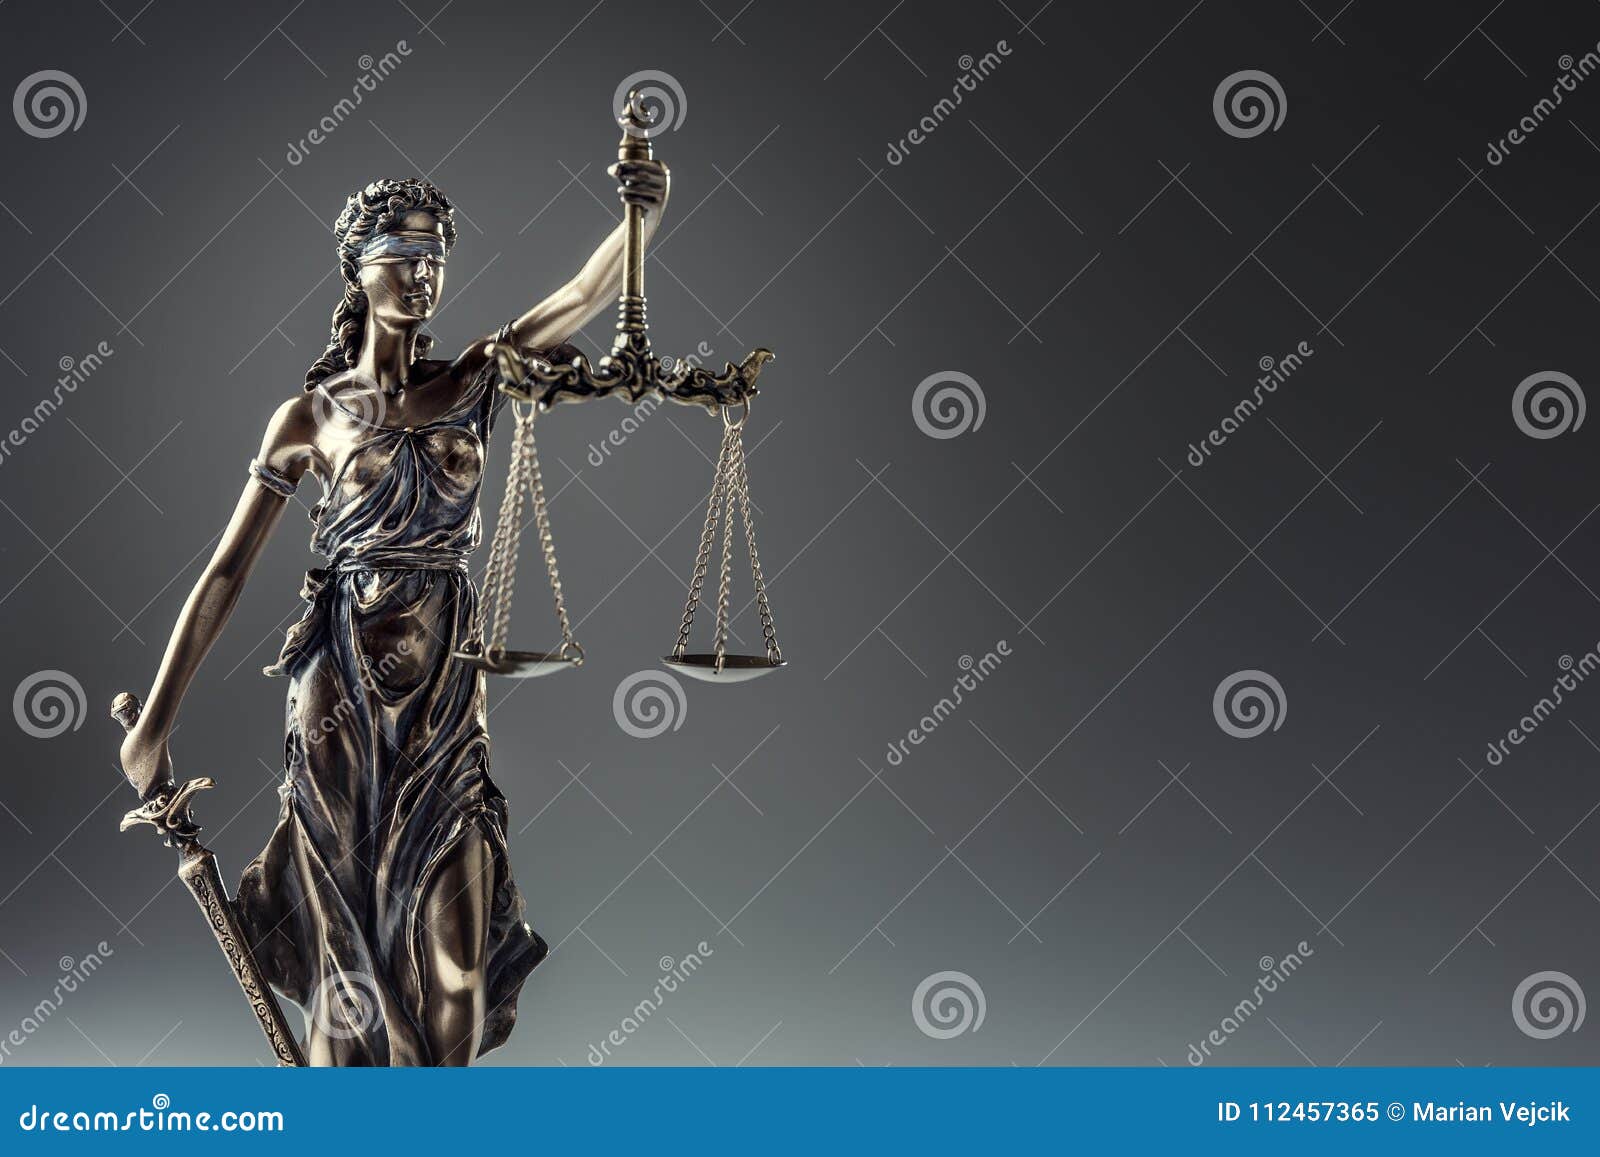 statute of justice. bronze statue lady justice holding scales an